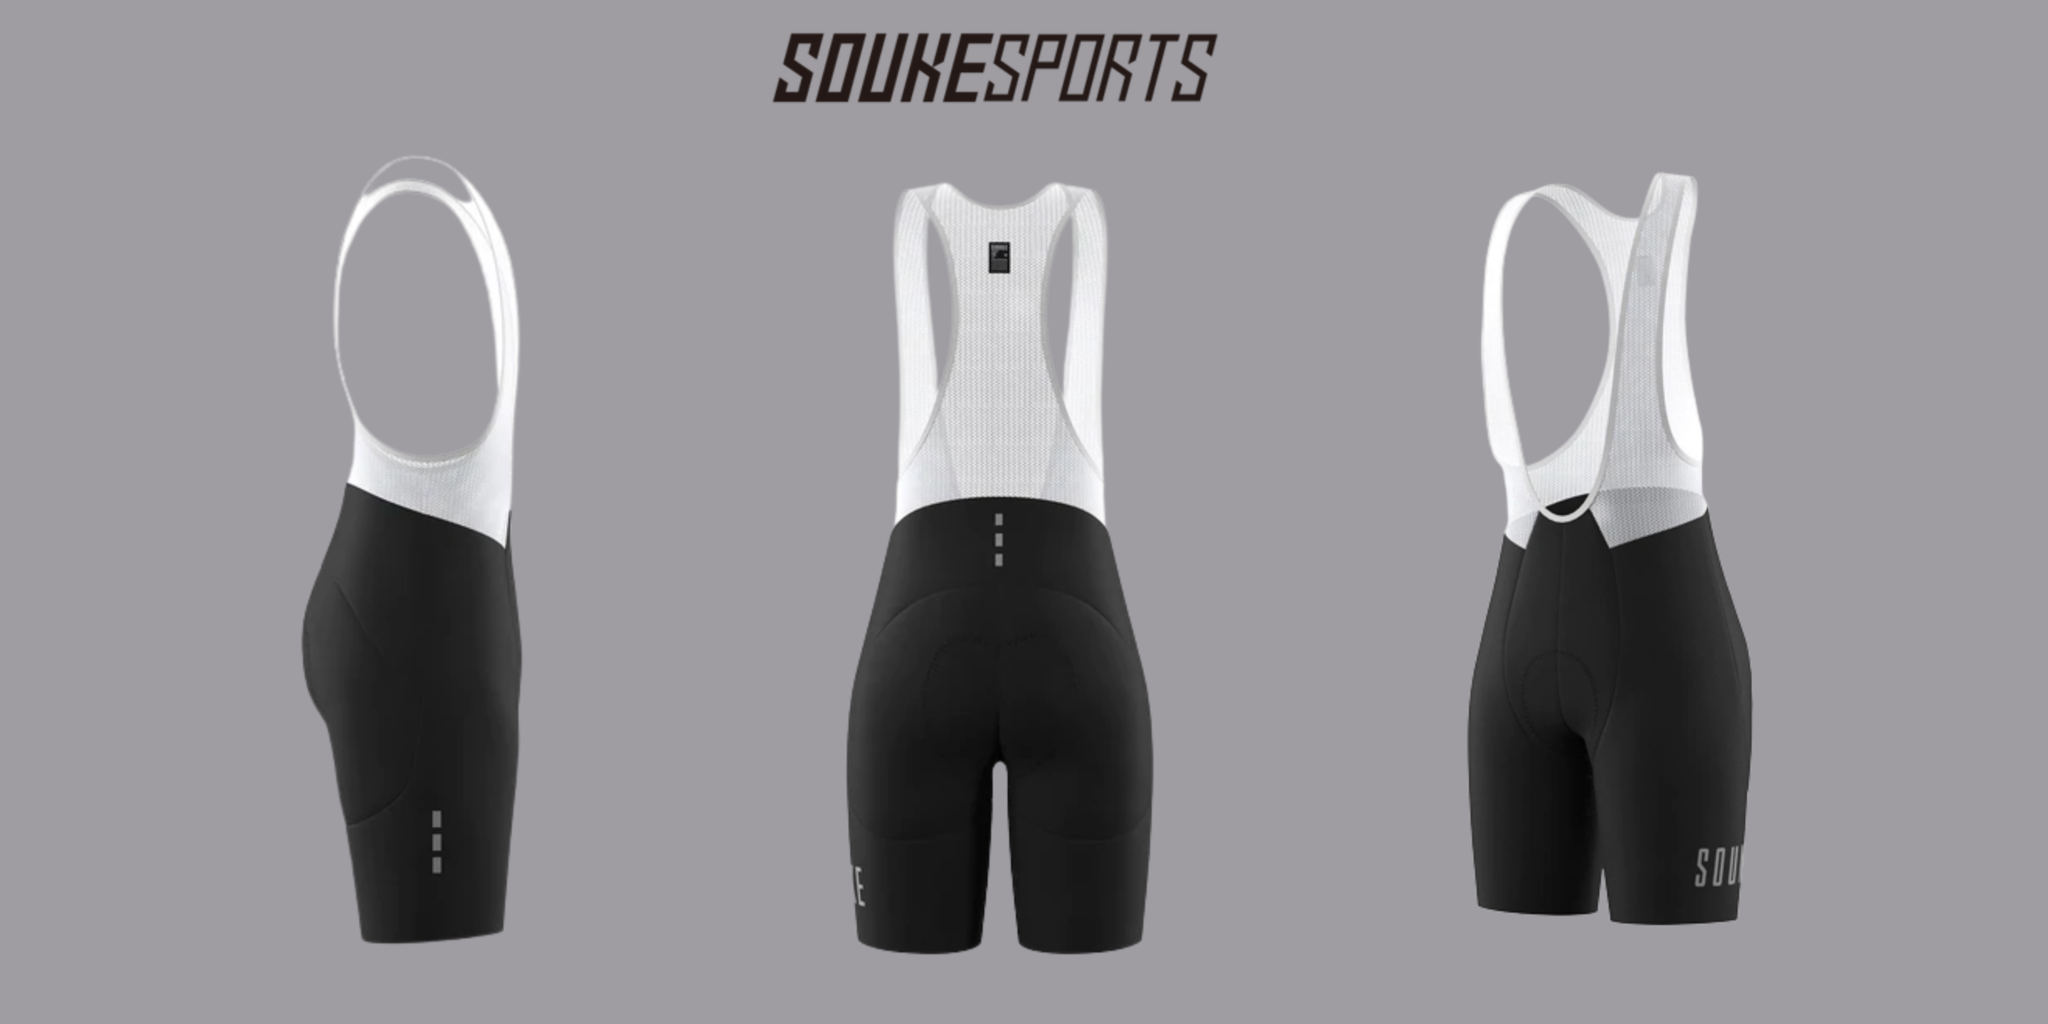 Make Your Ride More Comfortable With Bib shorts